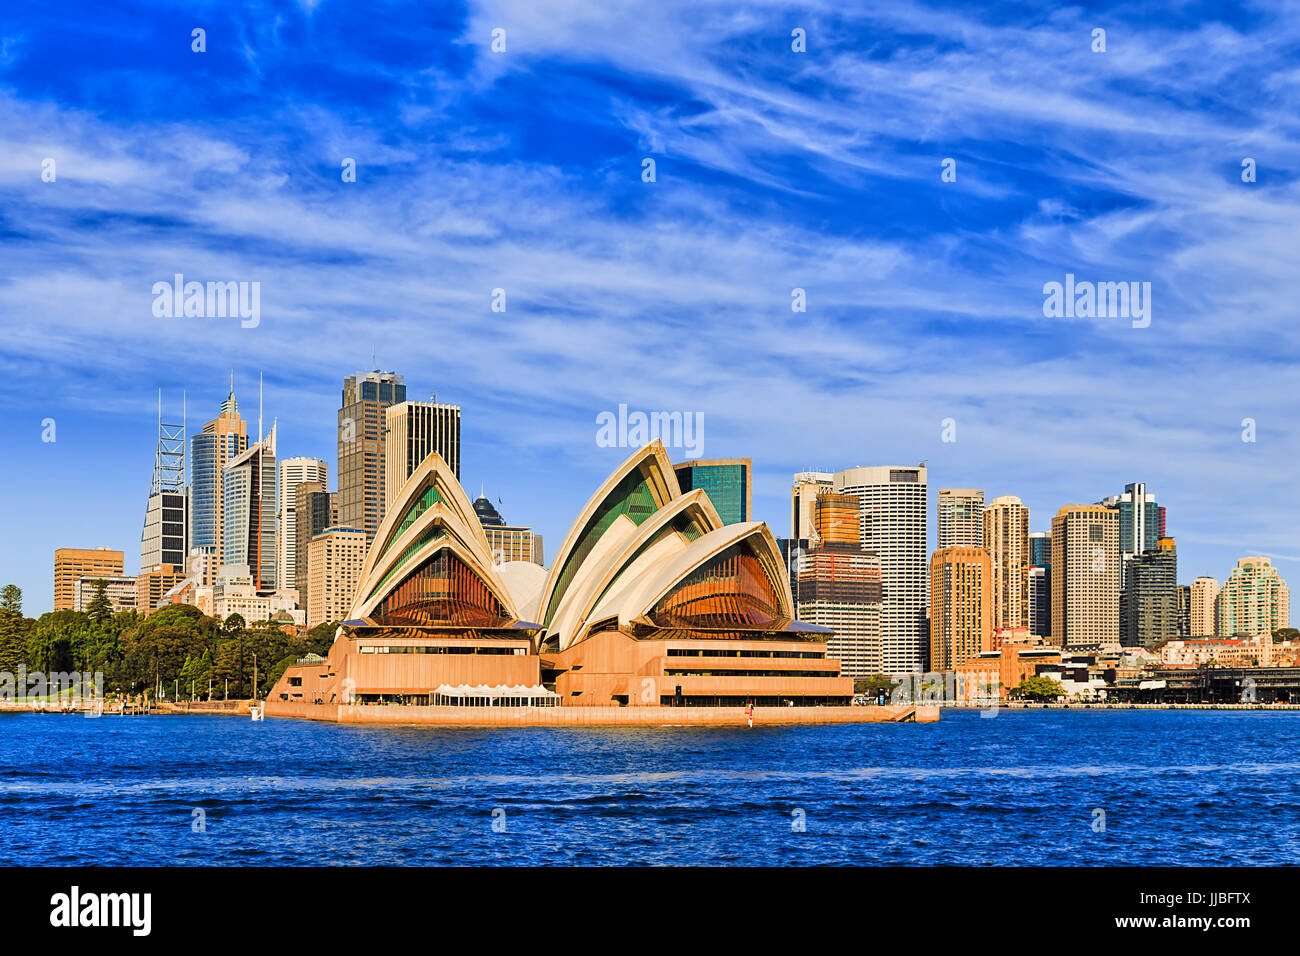 Modern cityline of Sydney city CBD landmarks as seen from passenger ferry in mid harbour on a sunny bright day under blue sky. Stock Photo